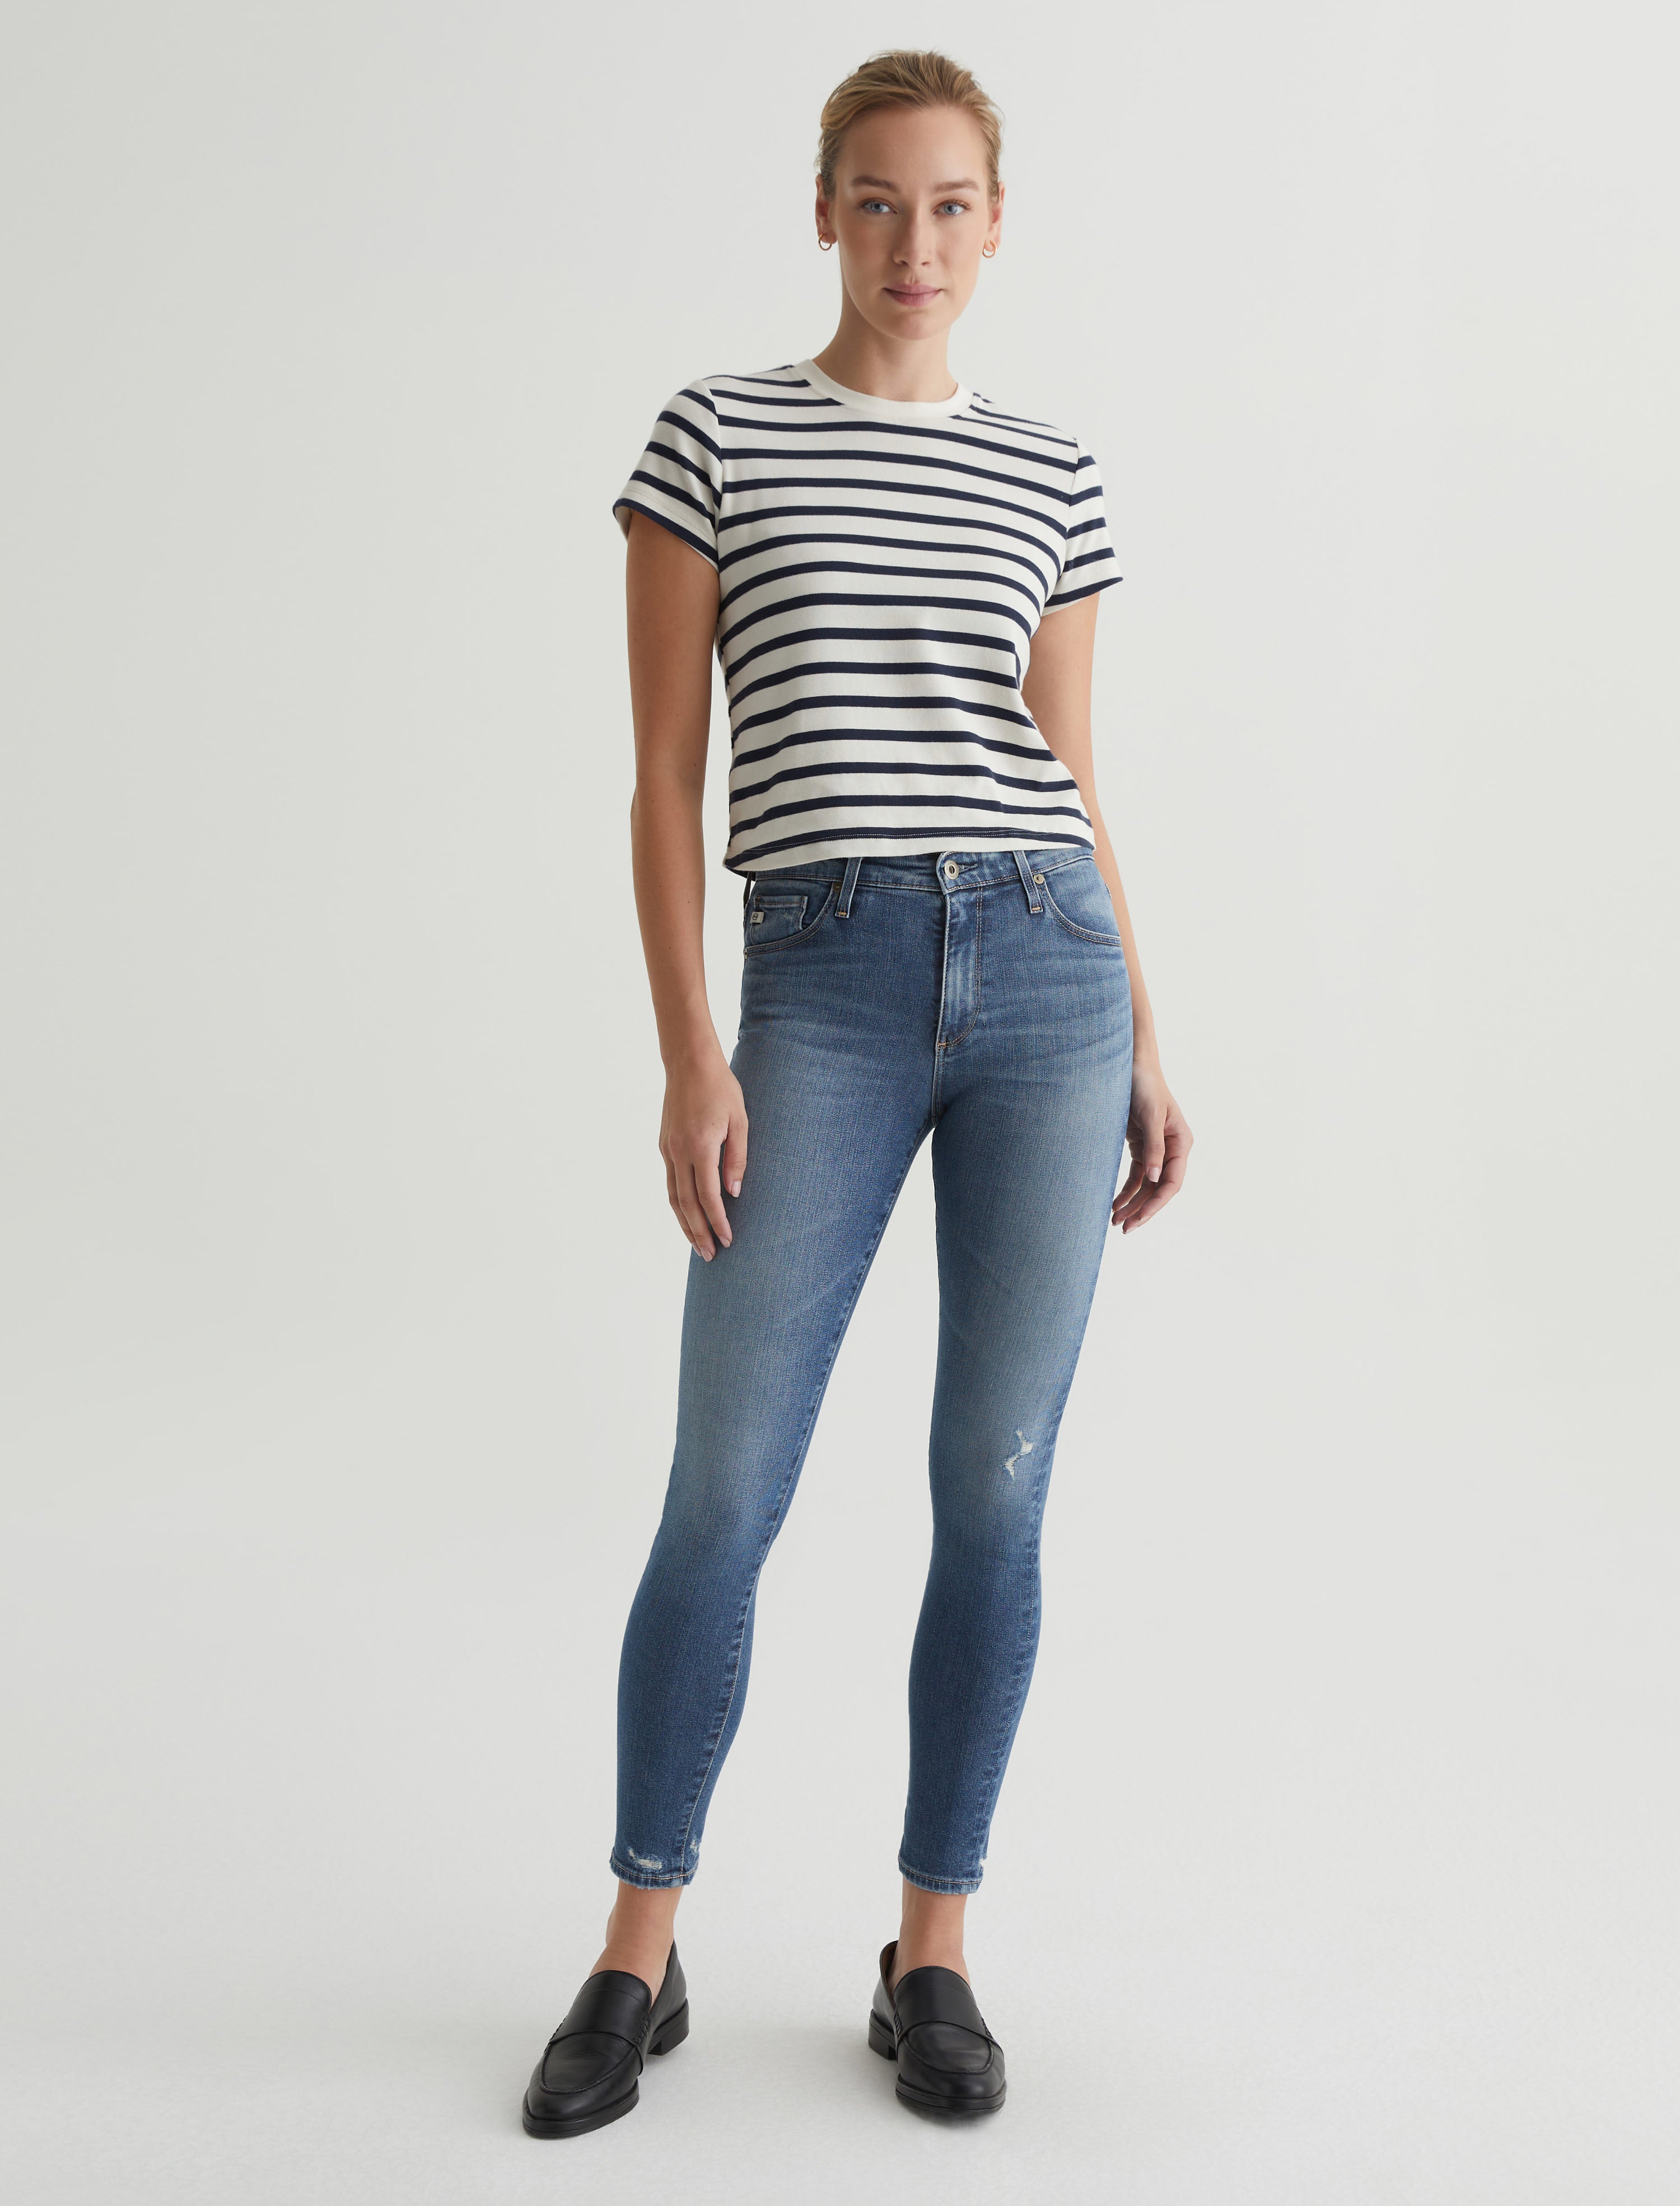 Women's Leg Jeans at AG Jeans Official Store